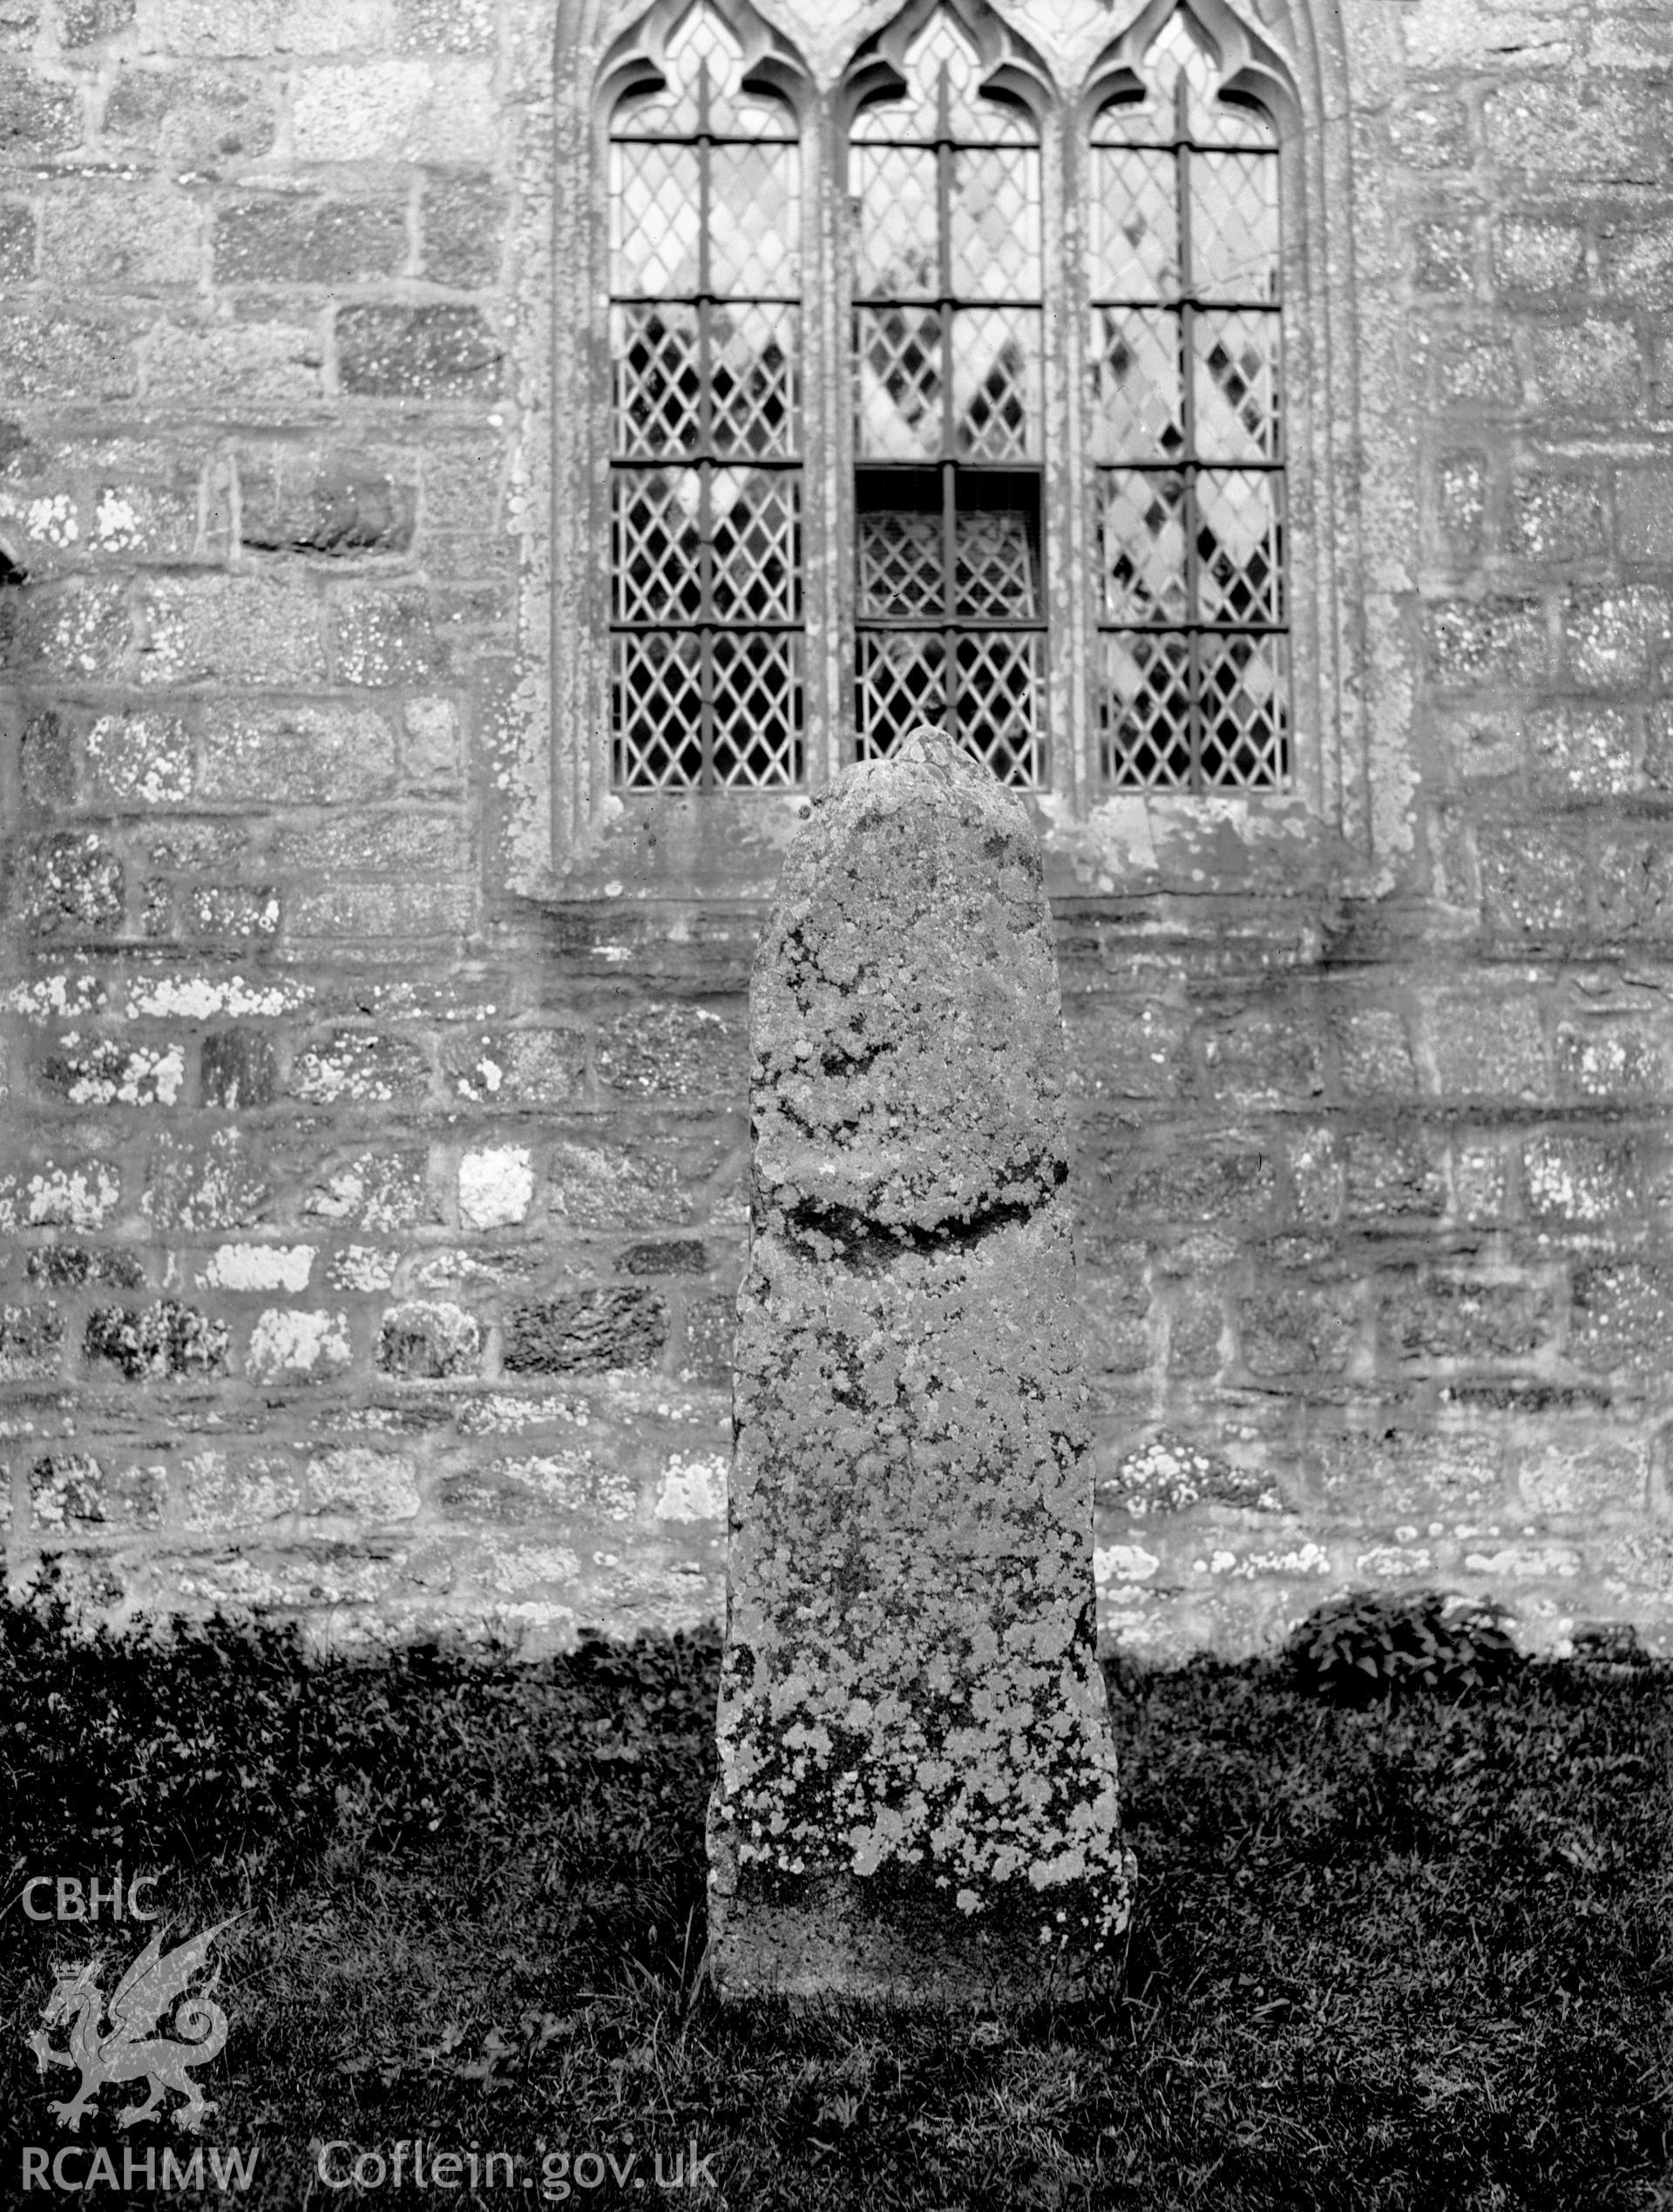 Digital copy of a nitrate negative showing exterior view of pillar stone in the churchyard of St Brynach's Church, Nevern. From the National Building Record Postcard Collection.